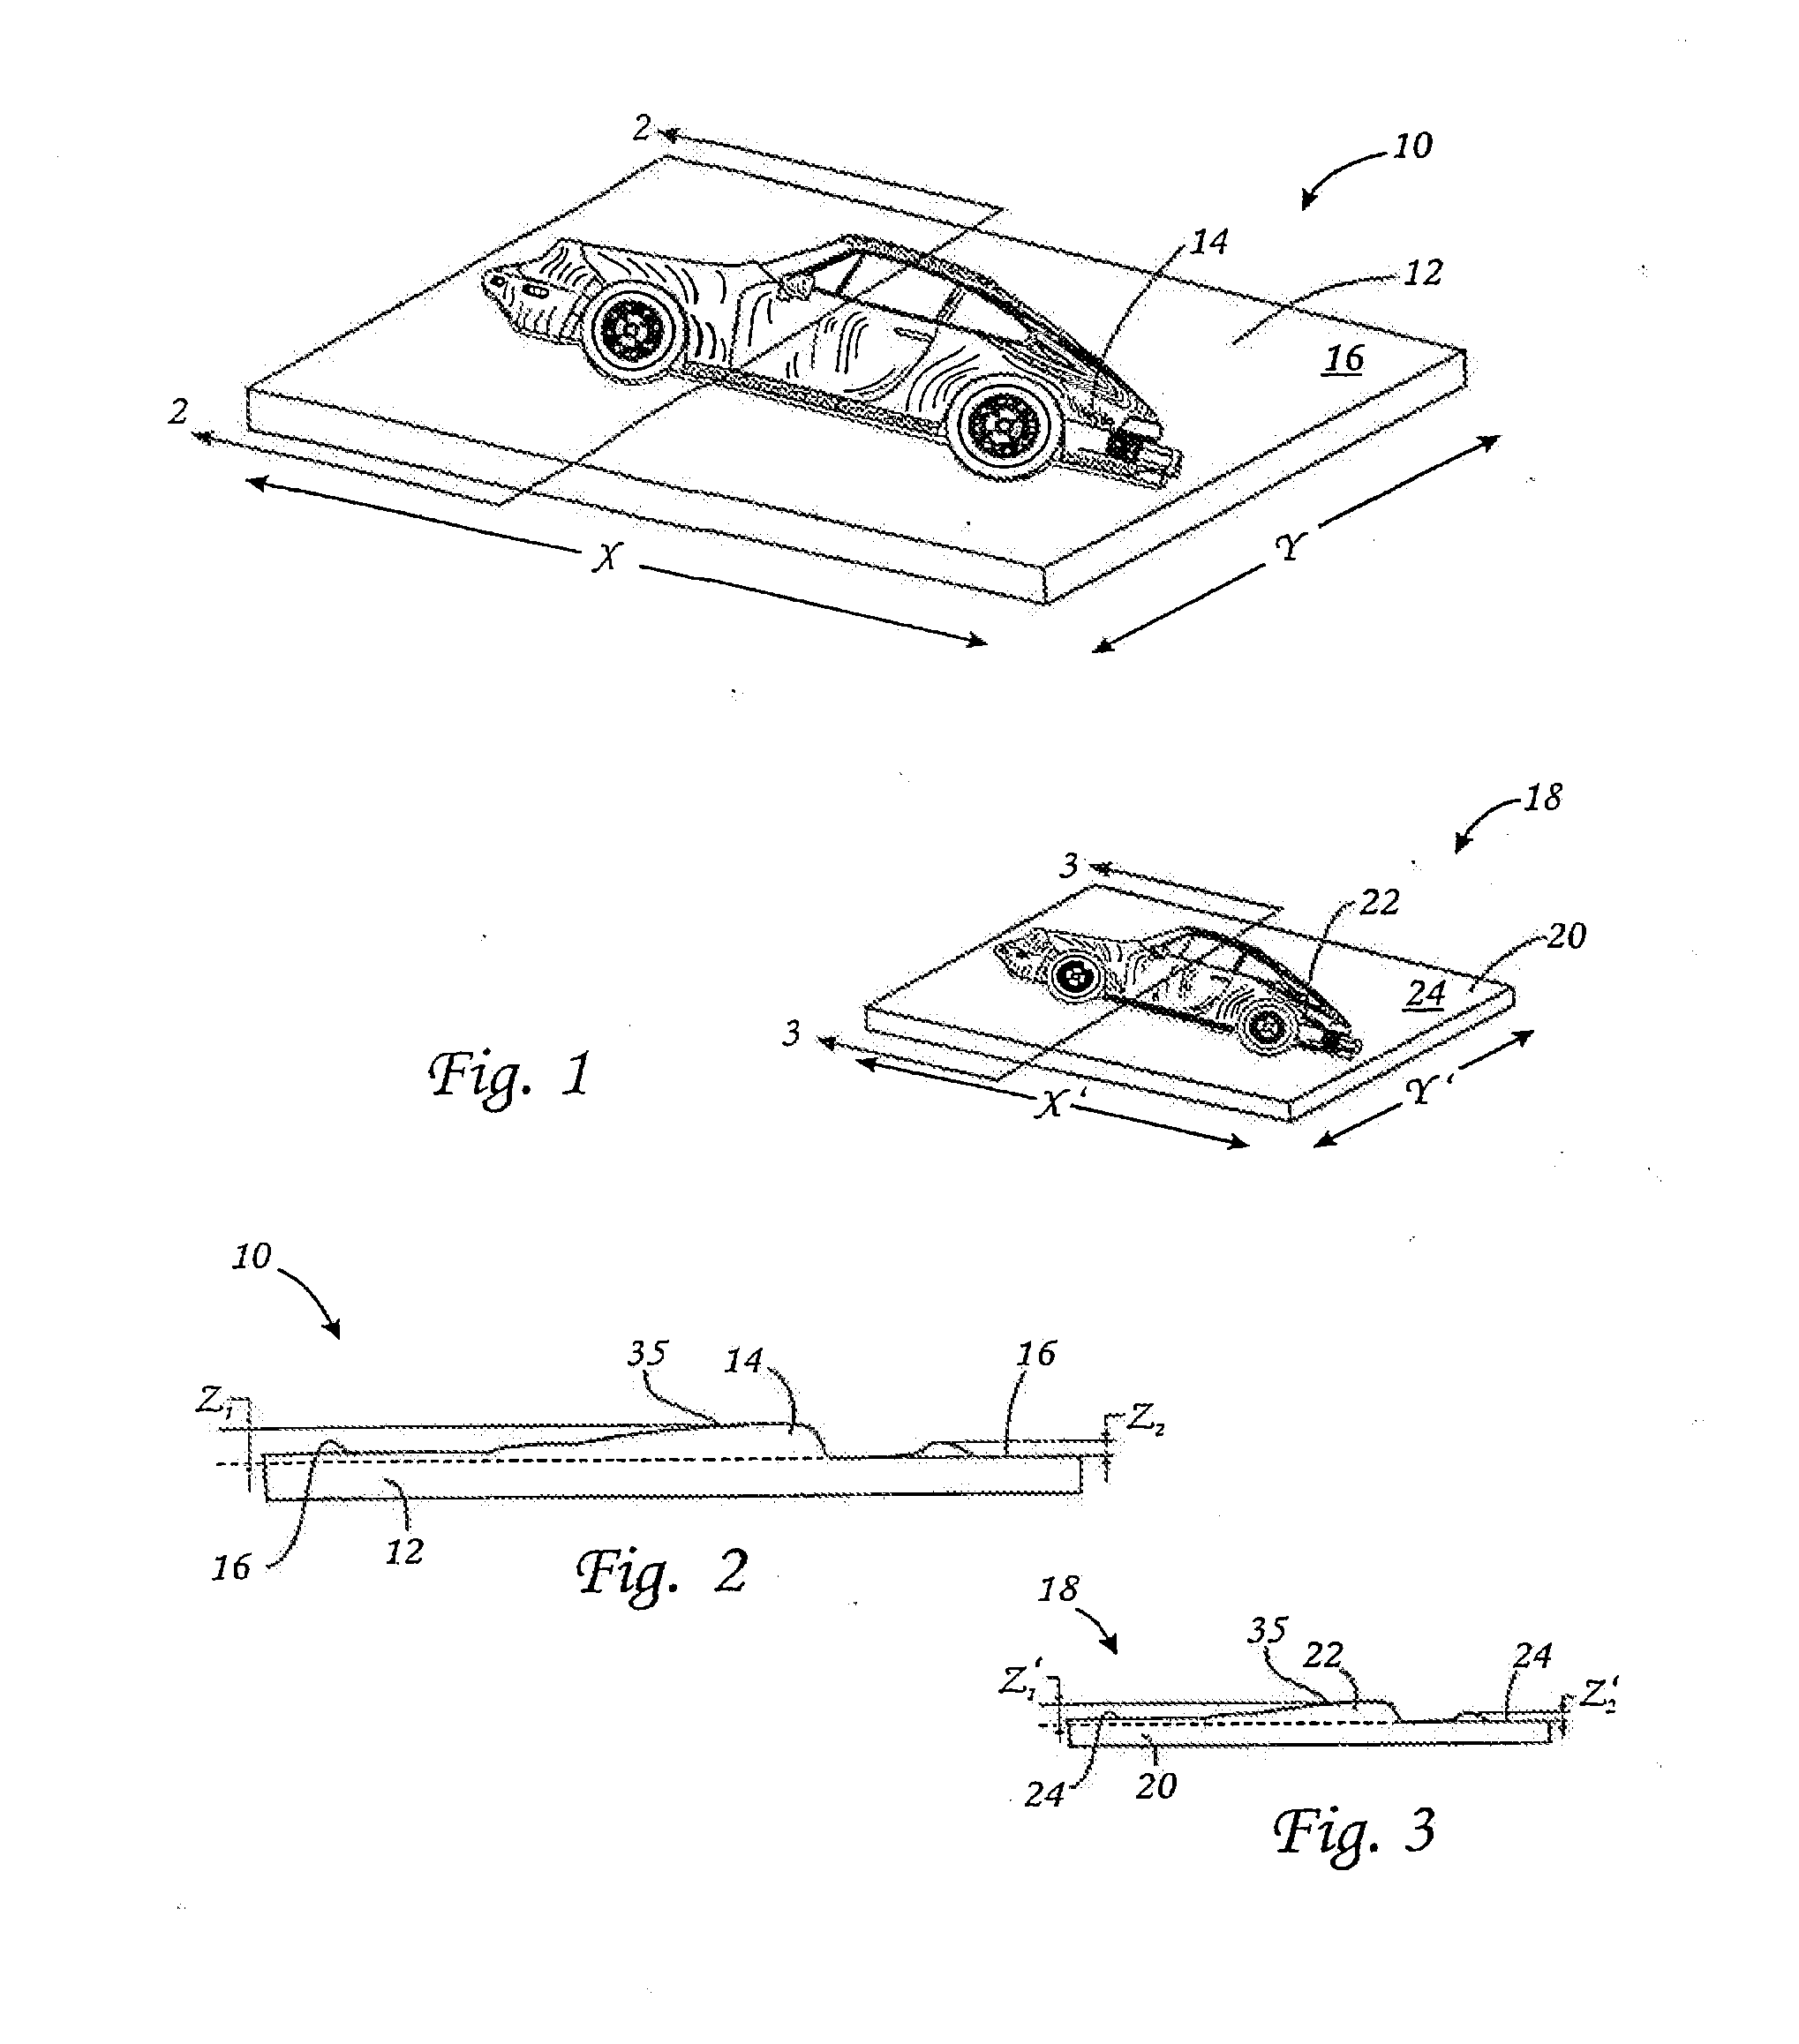 Method for the automated production of three-dimensional objects and textured substrates from two-dimensional or three-dimensional objects